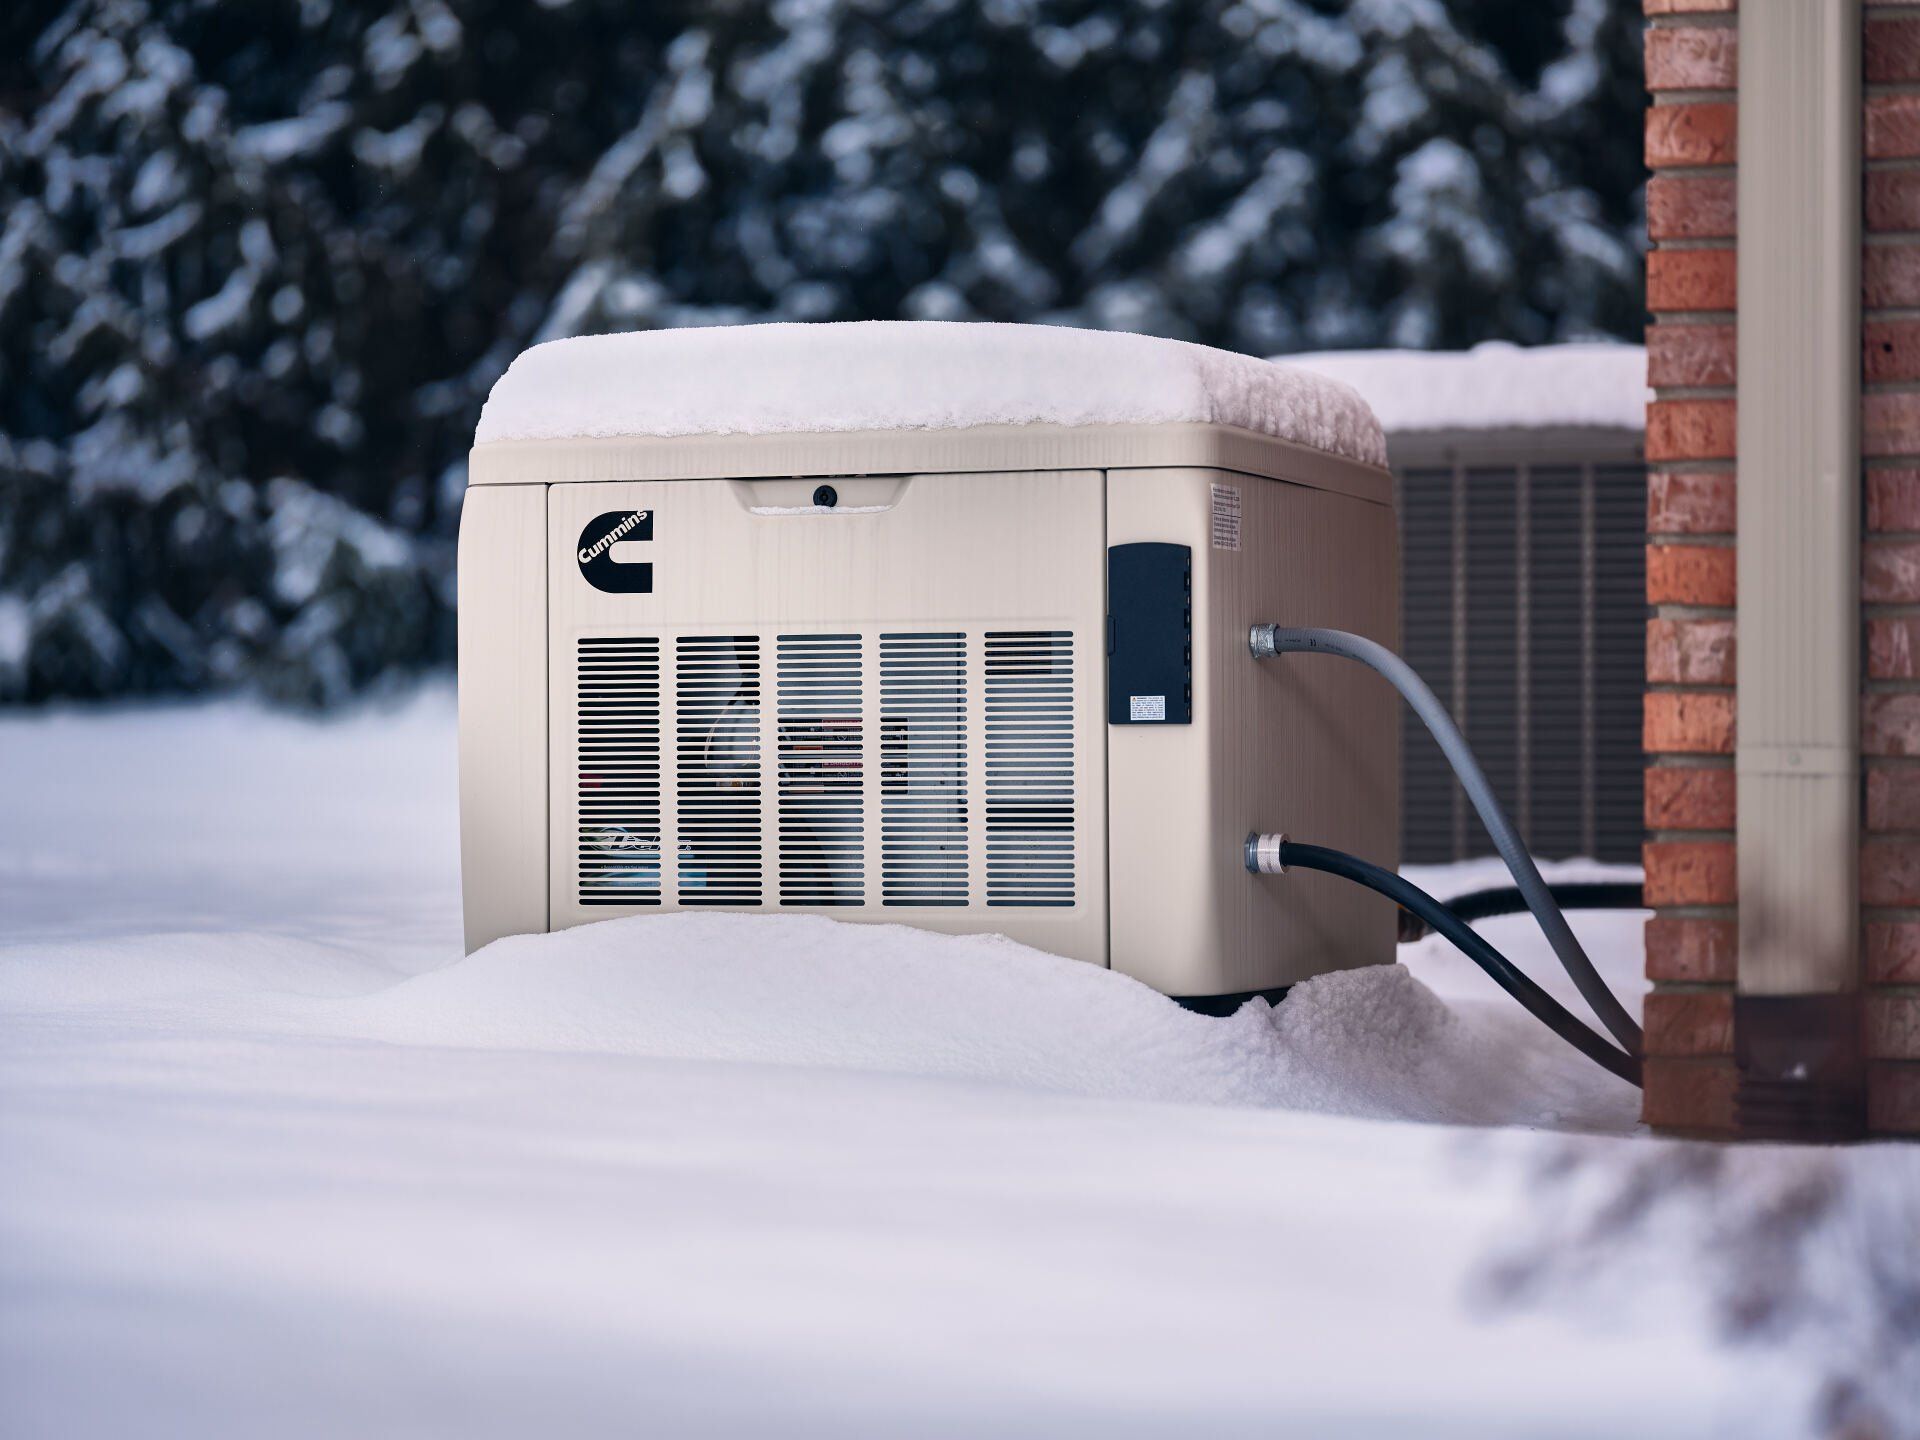 Cummins Standby Generators are excellent performers in Cold Weather Conditions